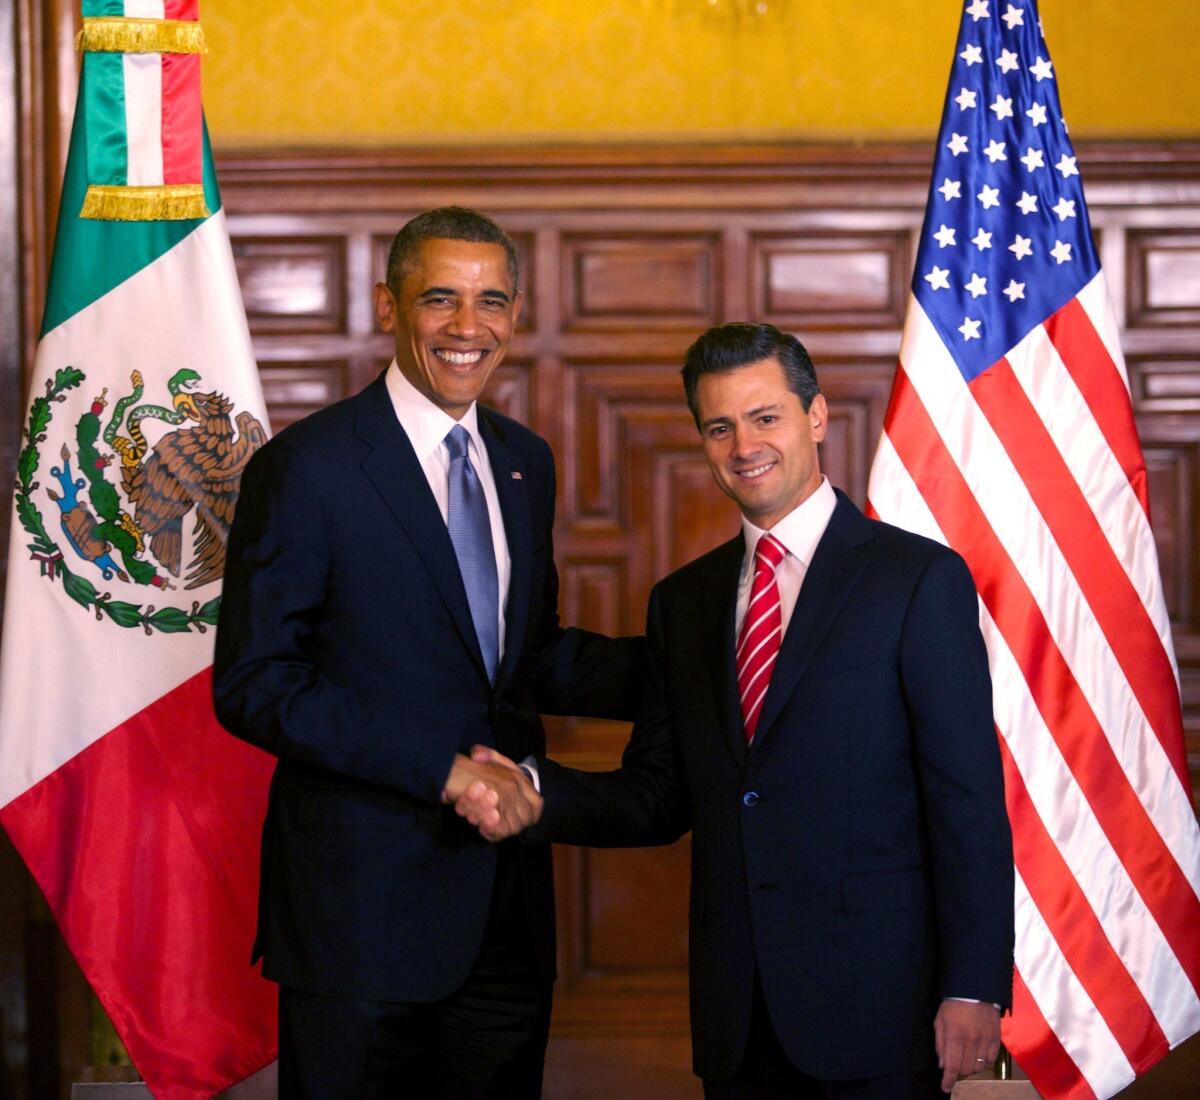 President Obama, left, is seen shaking hands with Mexican President Enrique Pena Nieto during a joint press conference at the National Palace in Mexico City.